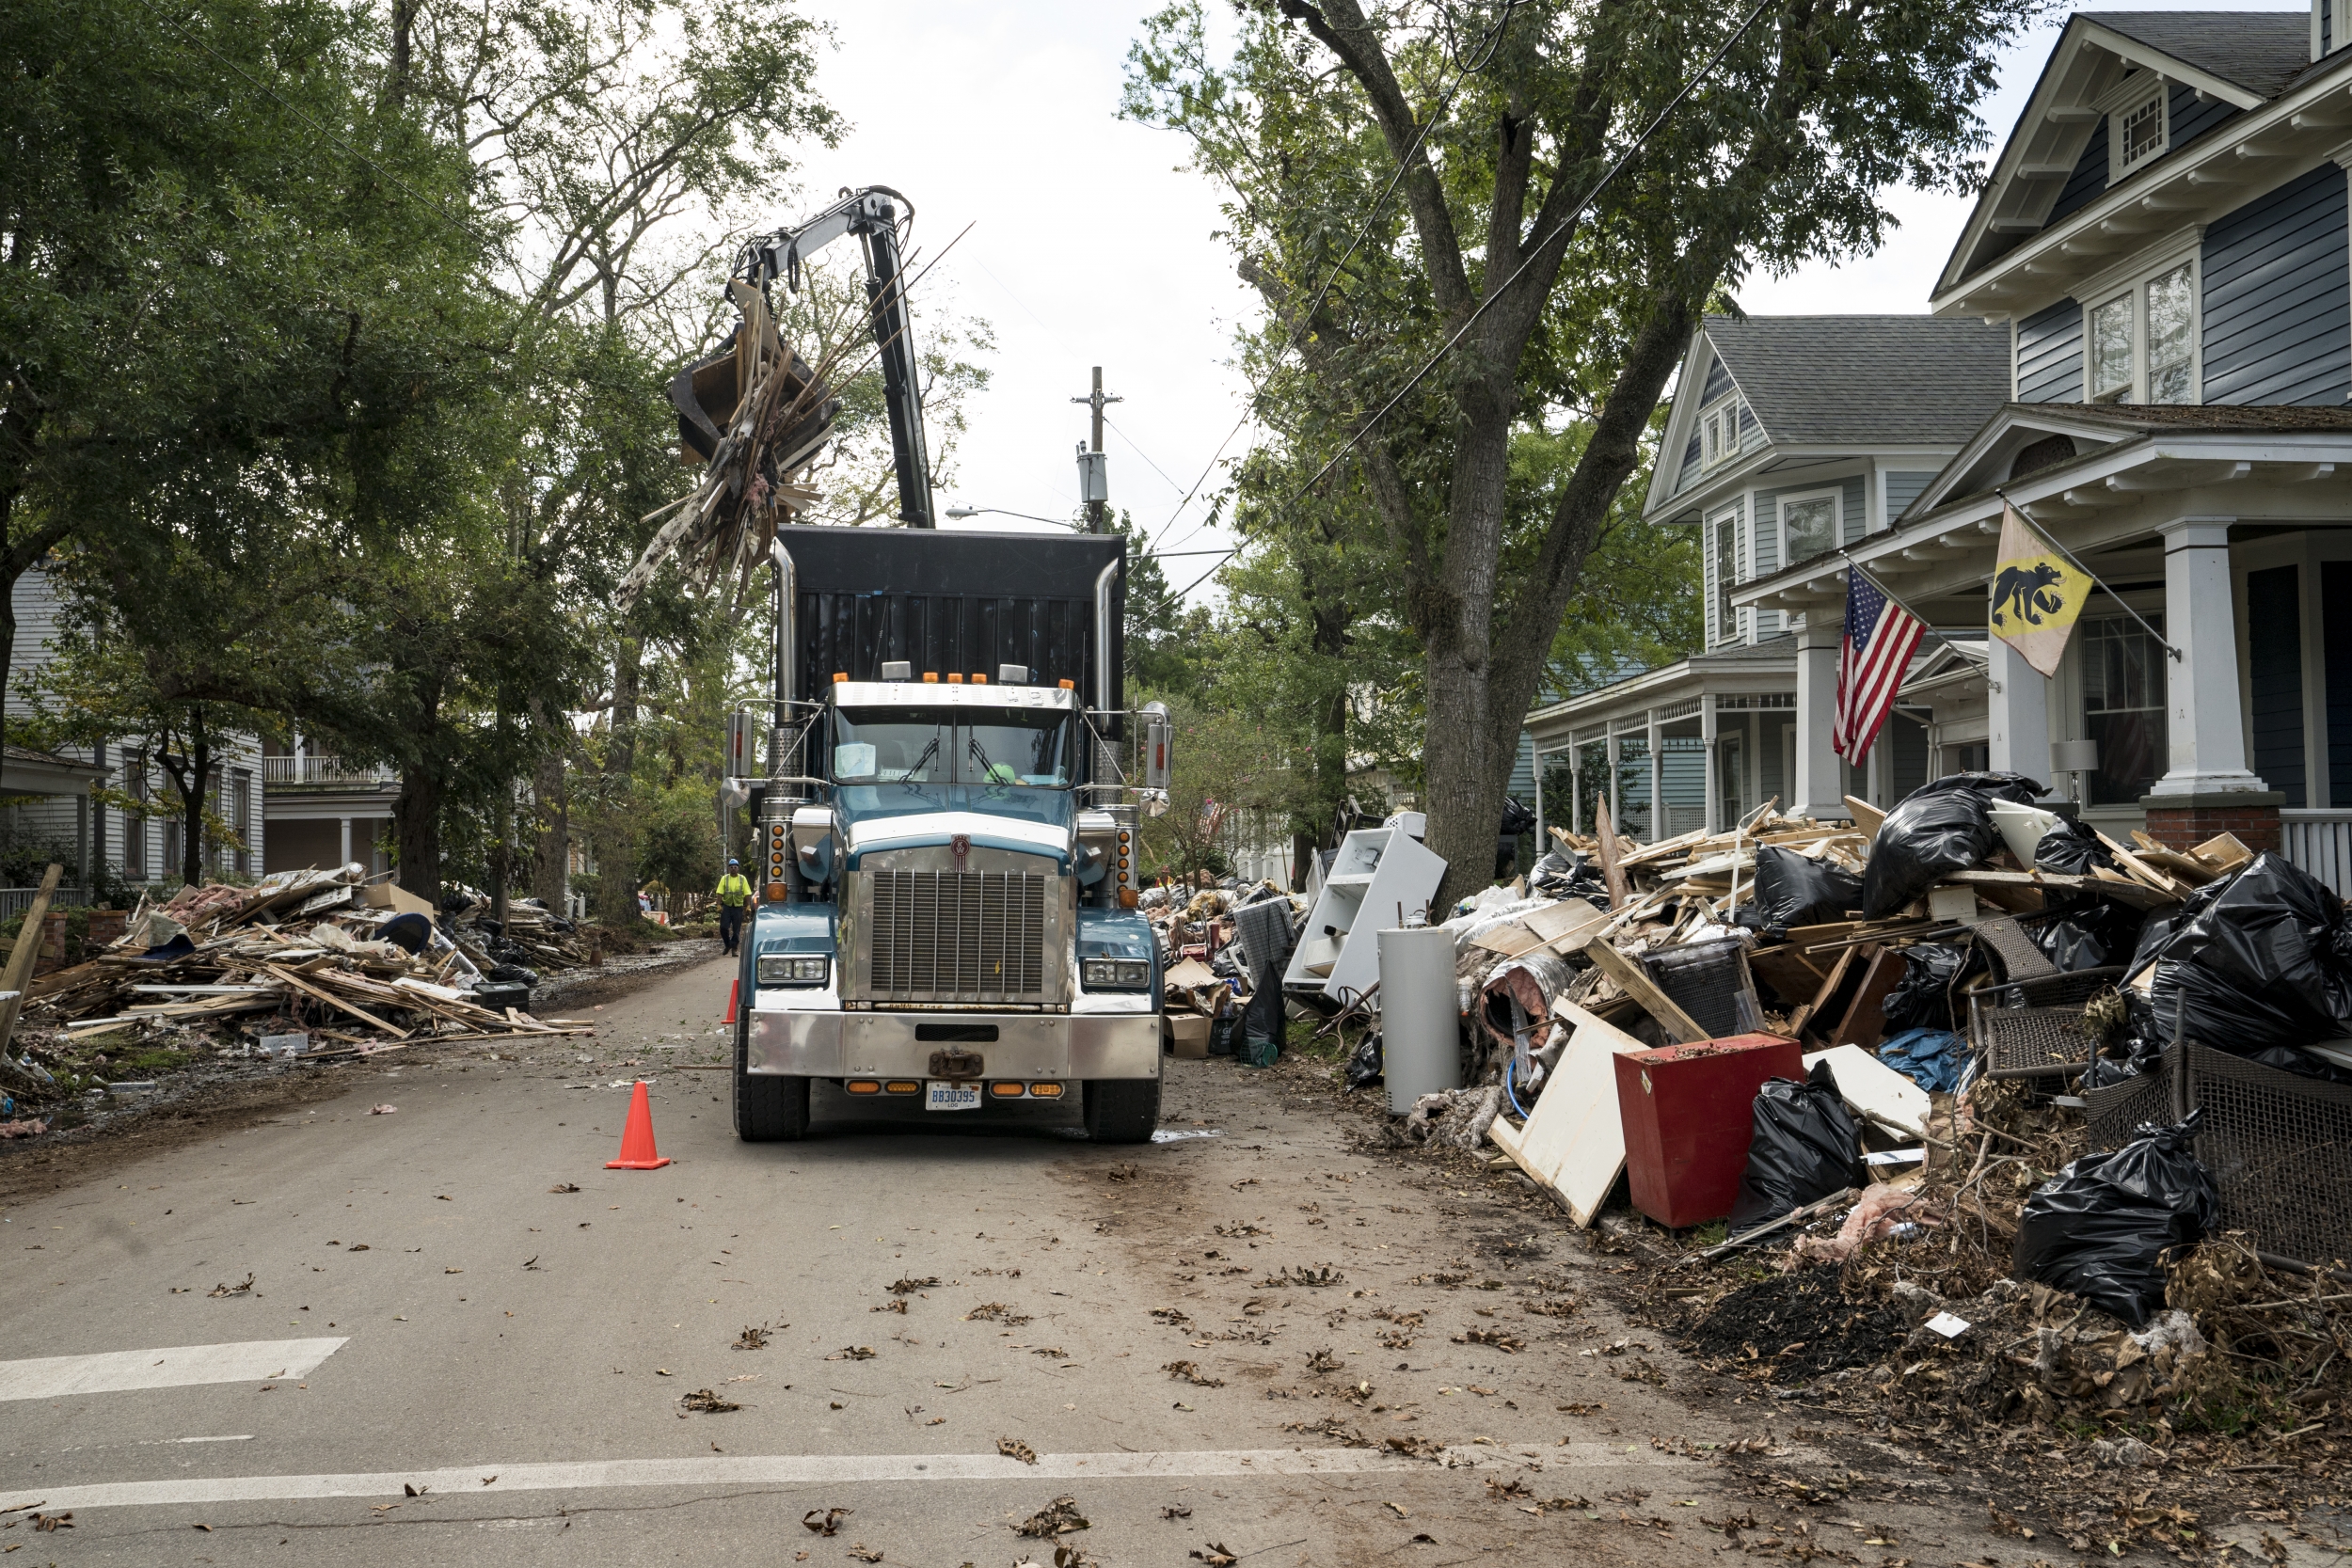 A photo of a large truck picking up debris lining a street